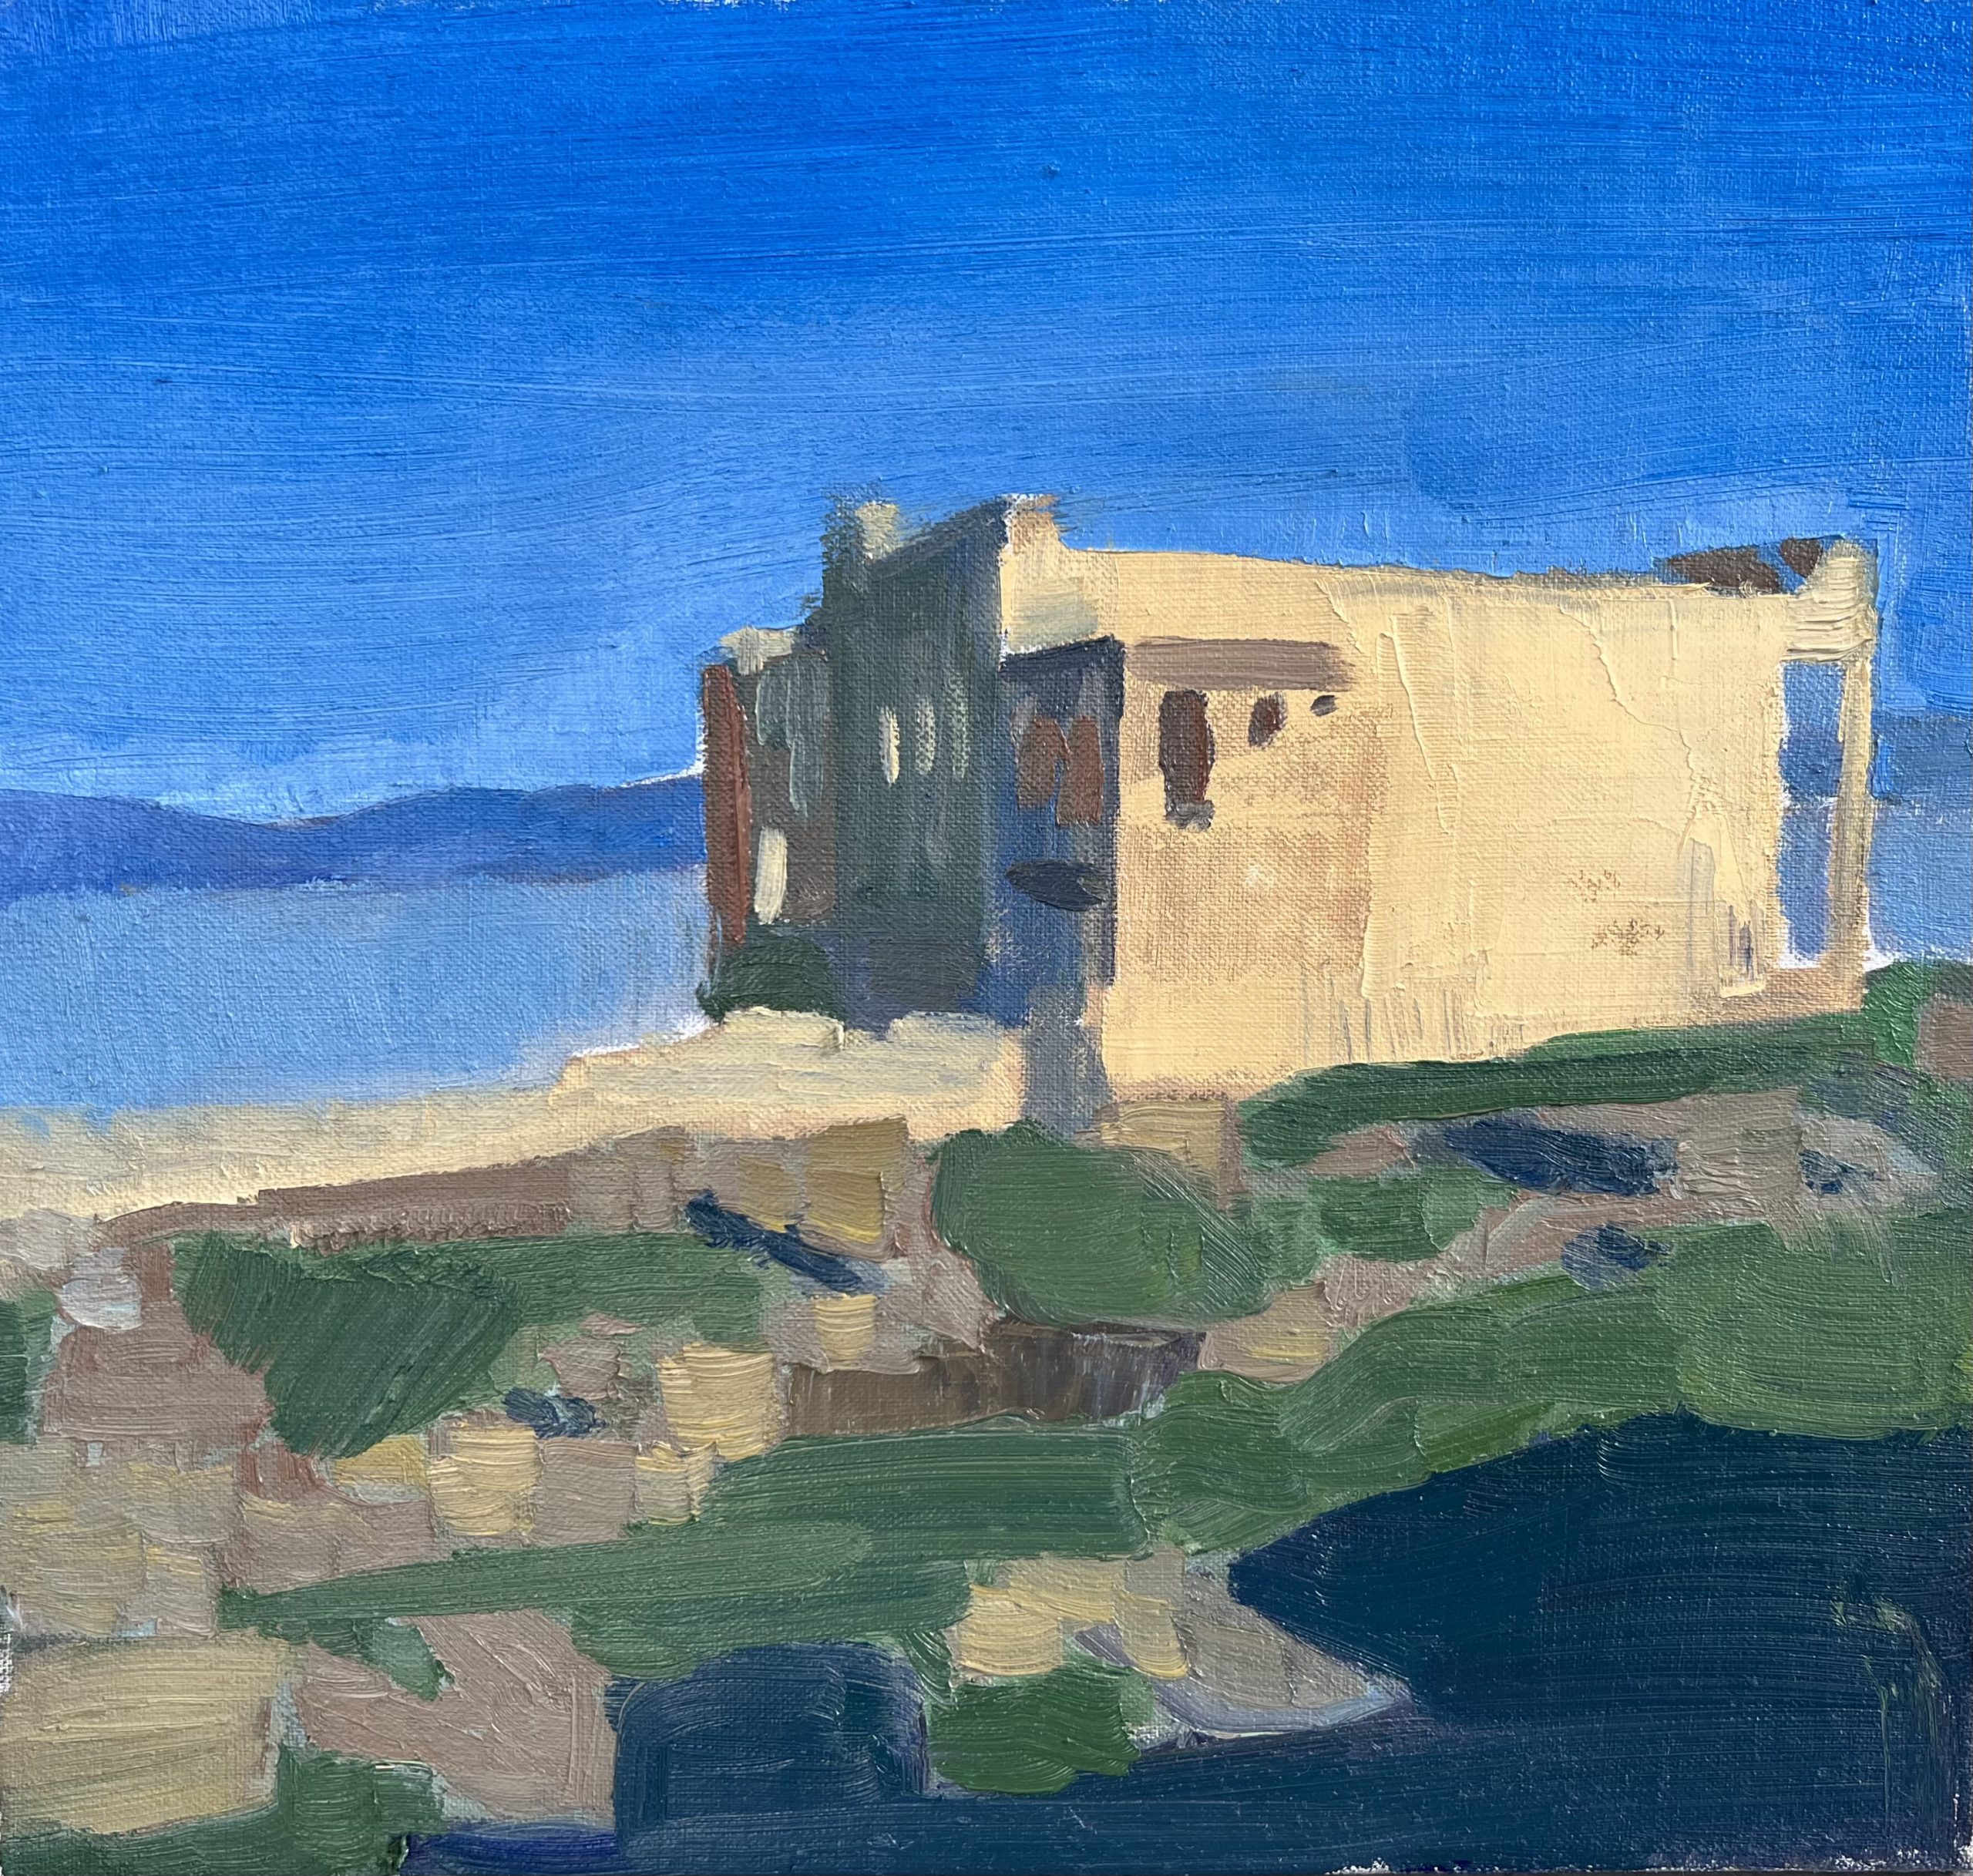 Anna's painting of the Erechtheion on the Acropolis.